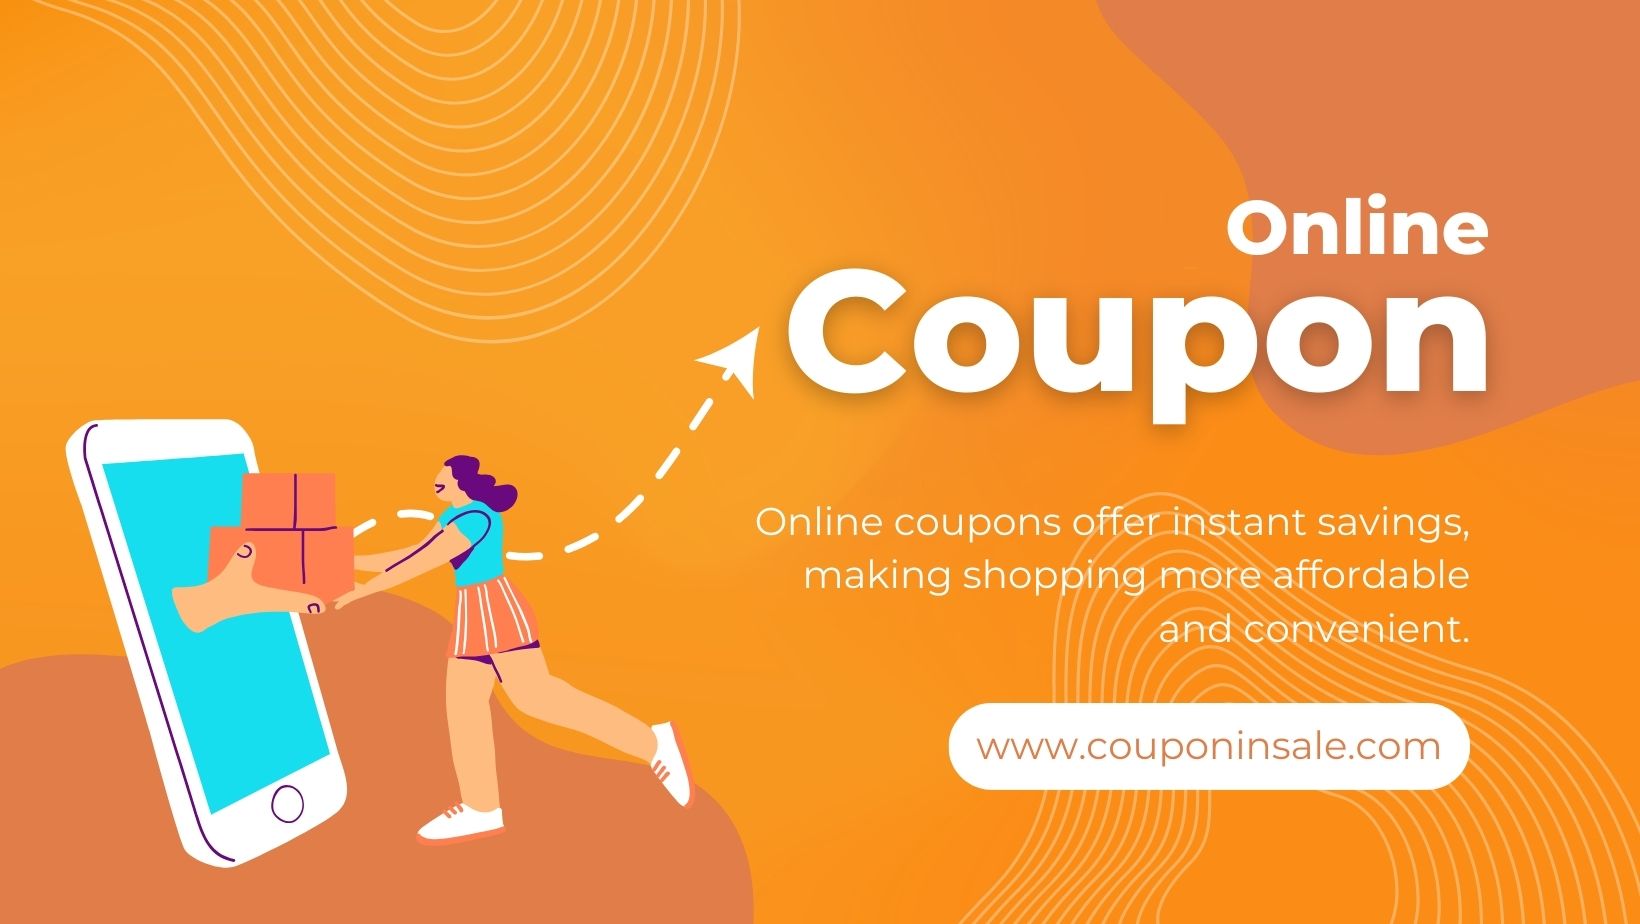 what is coupon in sale?